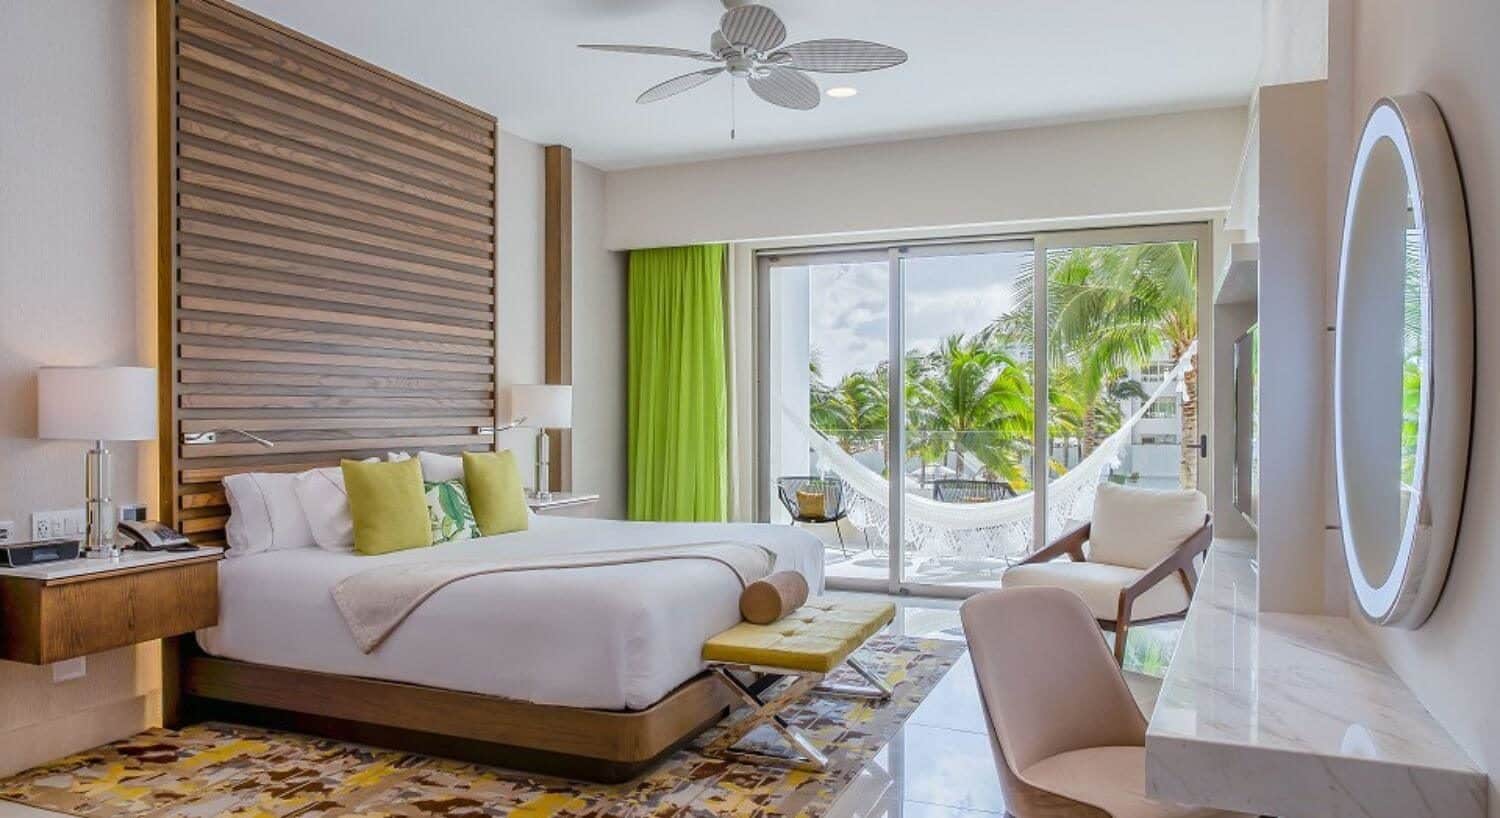 Bedroom with a bed with white bedding, a brown shiplap backboard, green and yellow pillows and curtains, a desk and chair, and sliding glass doors out to a patio with a hammock and the ocean in the background.